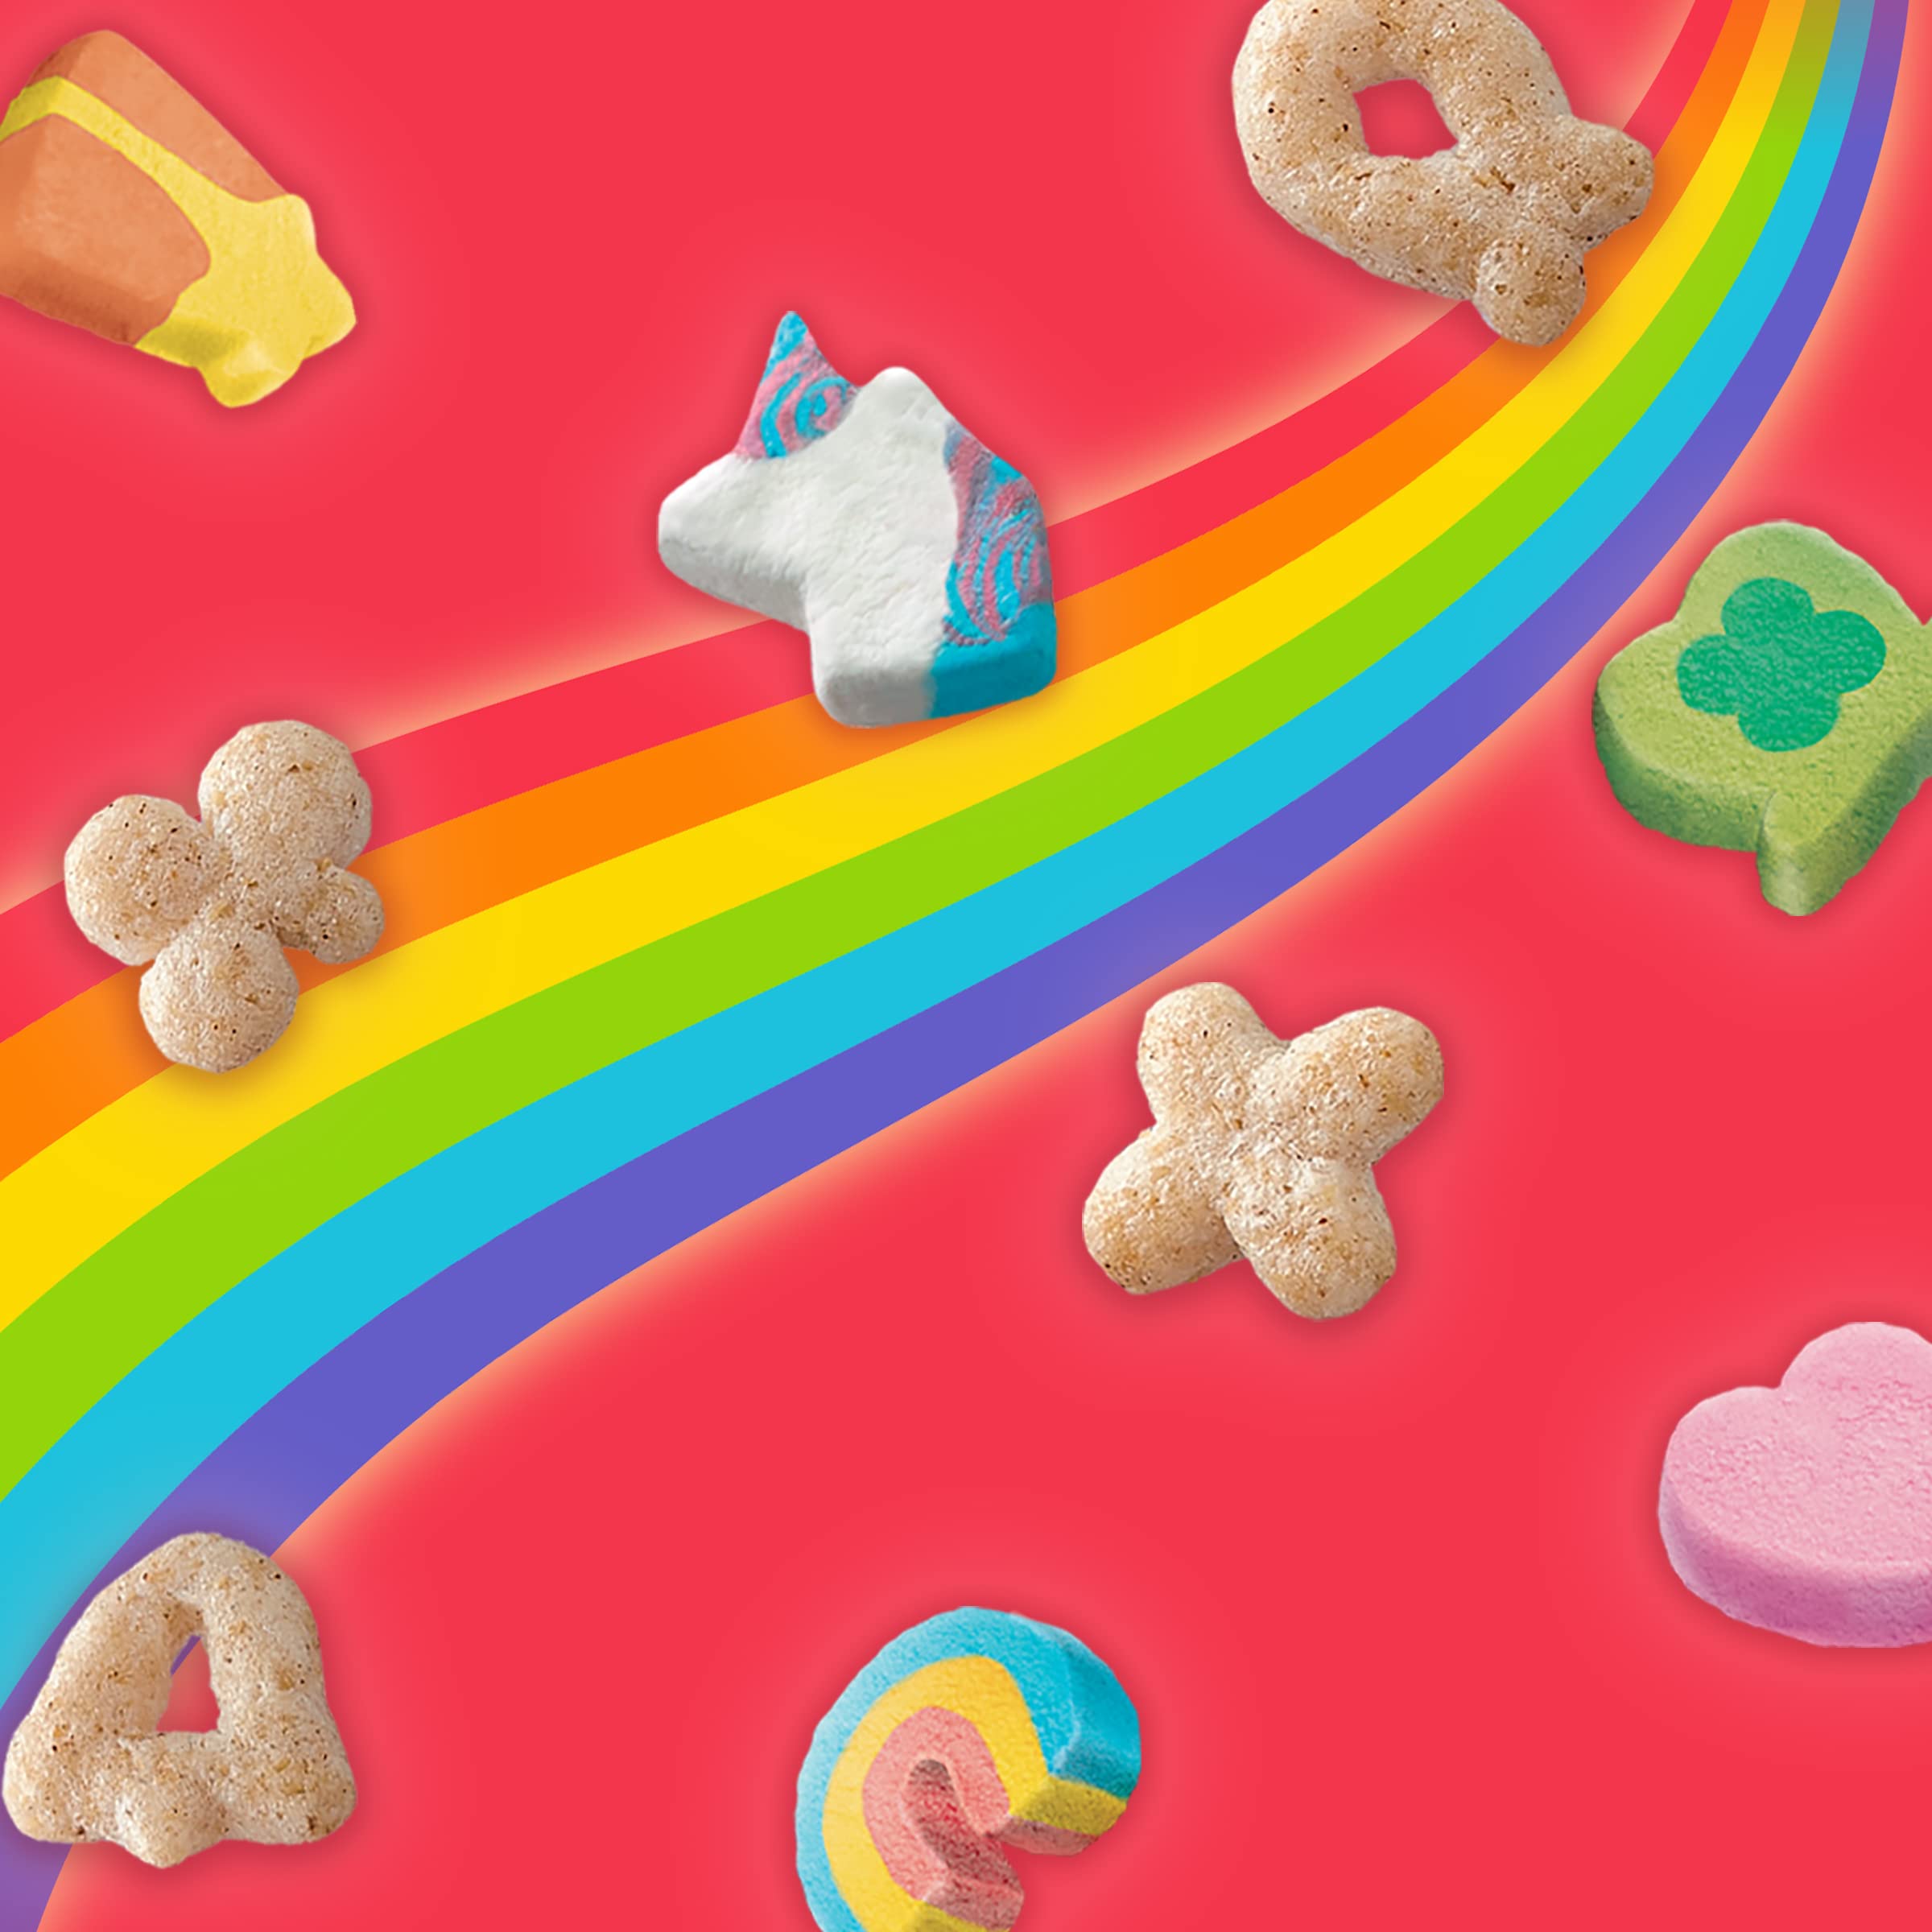 16-Count 0.85-Oz Lucky Charms Breakfast Cereal Treat Bars $4.95 w/ S&S + Free Shipping w/ Prime or on orders over $25